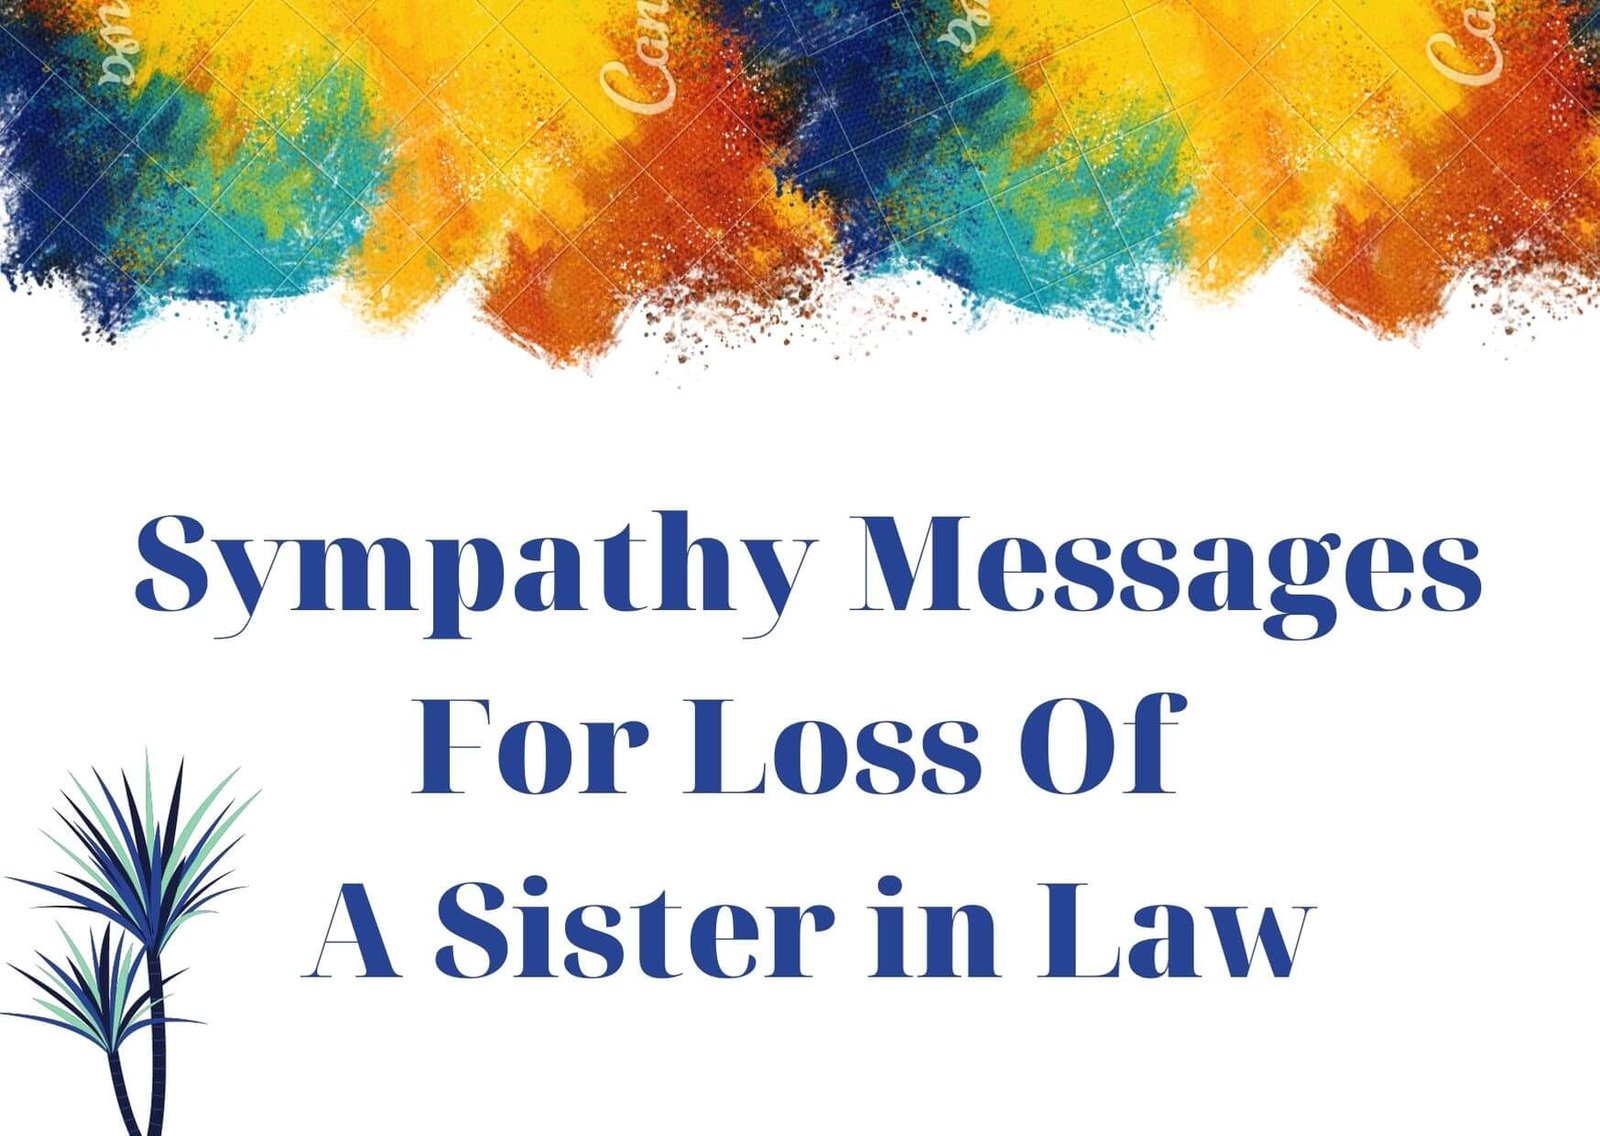 Sympathy Messages For Loss Of A Sister in Law